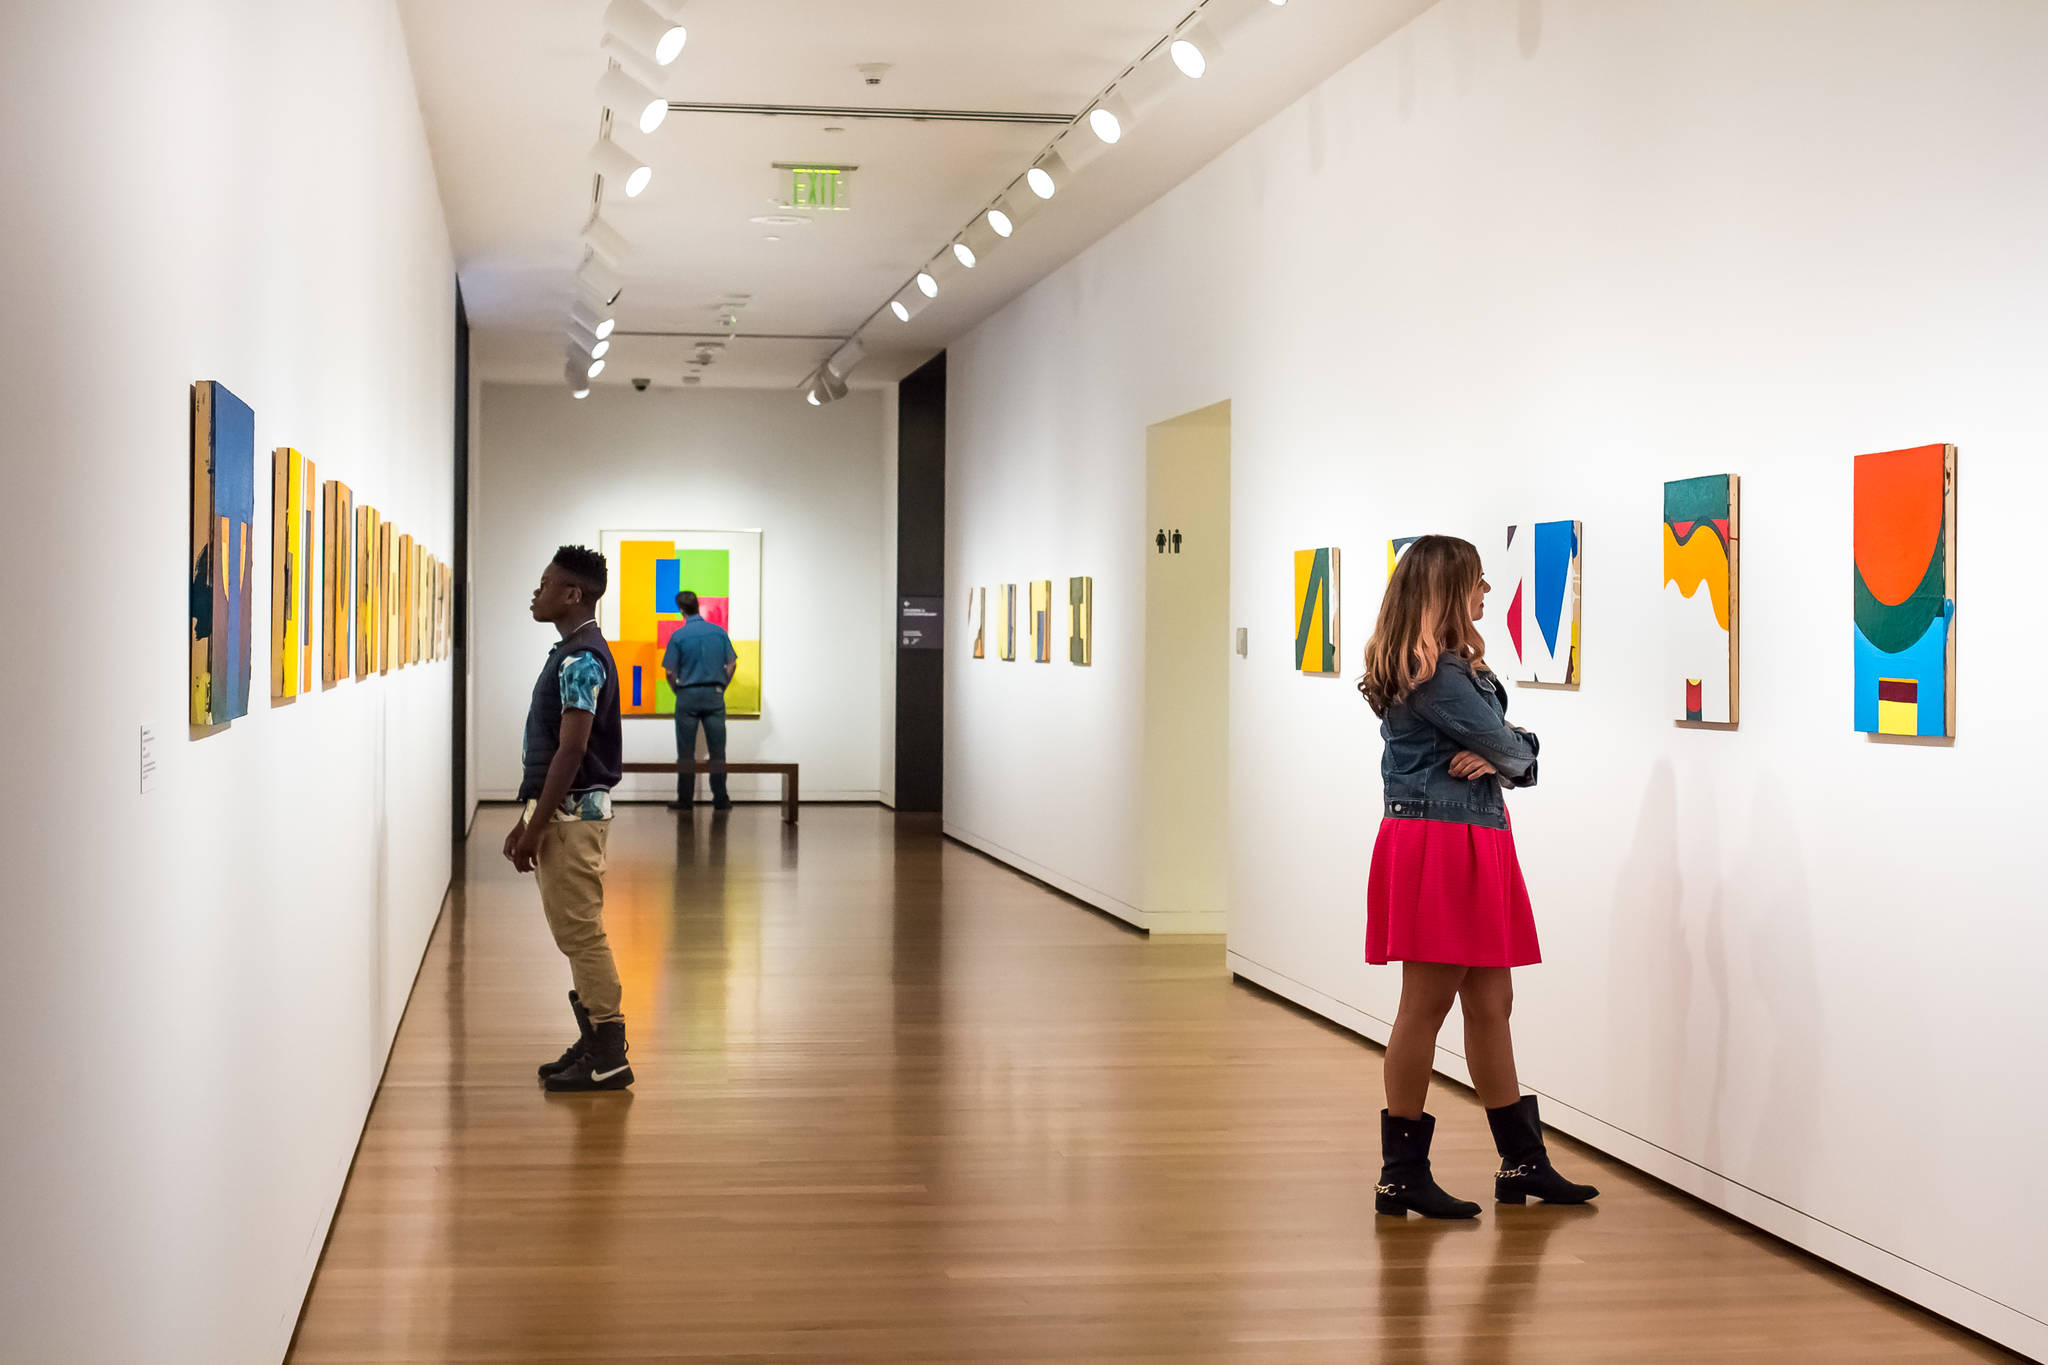 Walking Seattle Art Museum’s halls is just one of the options available on Museum Day. Photo by Natali Wiseman